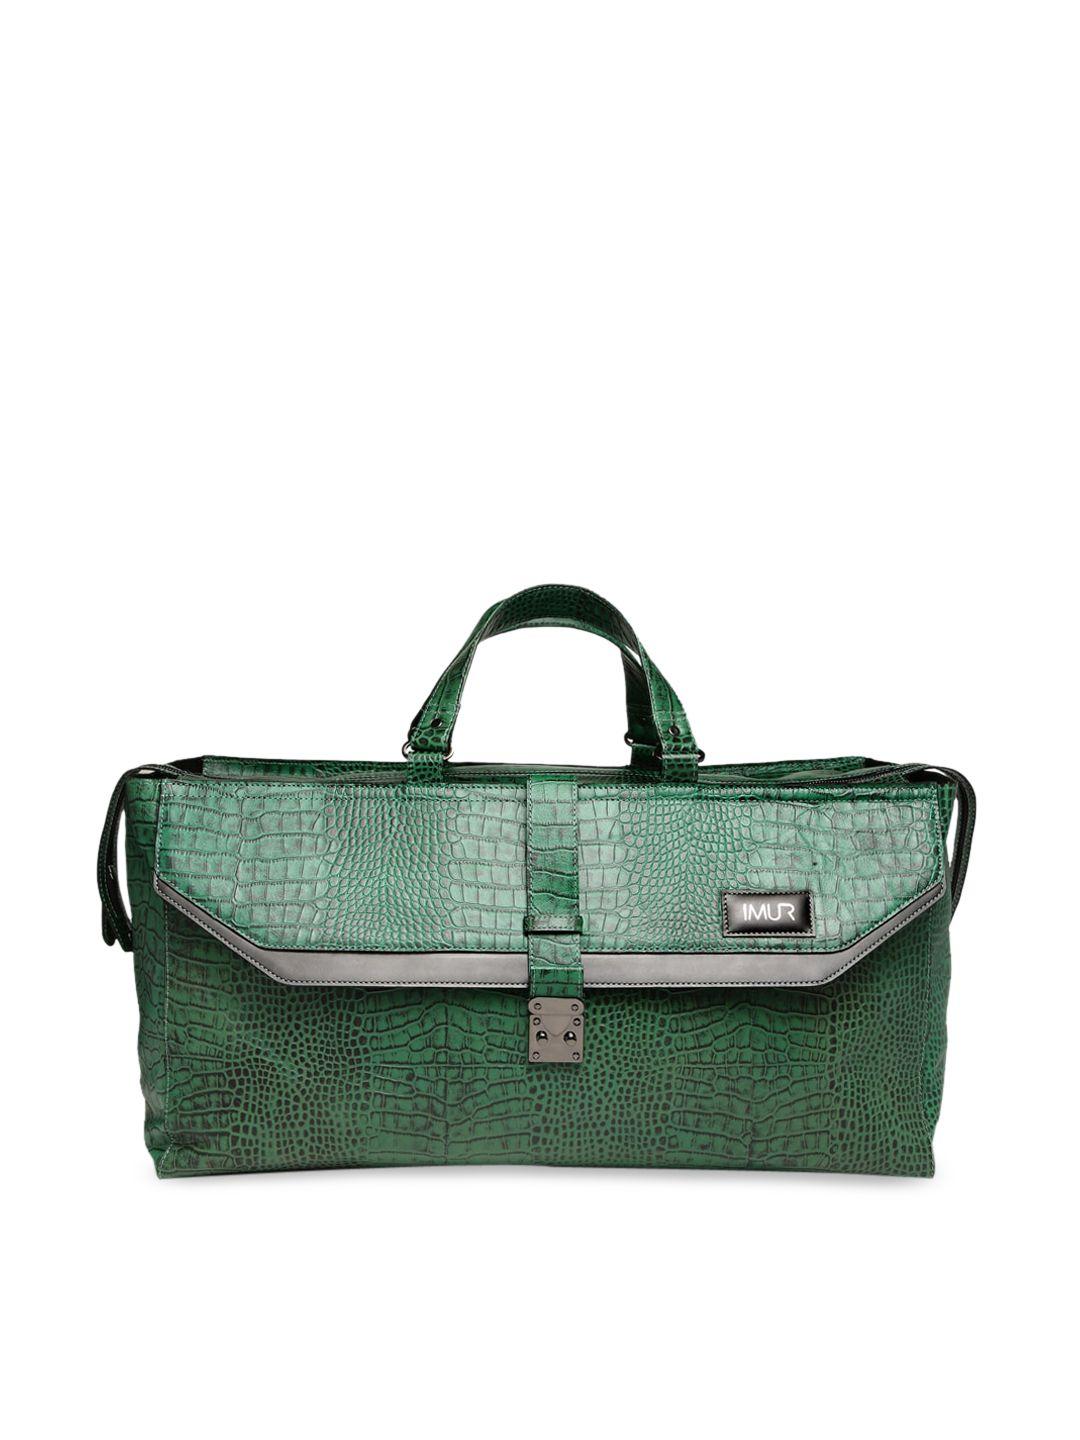 imur green leather textured travel bag